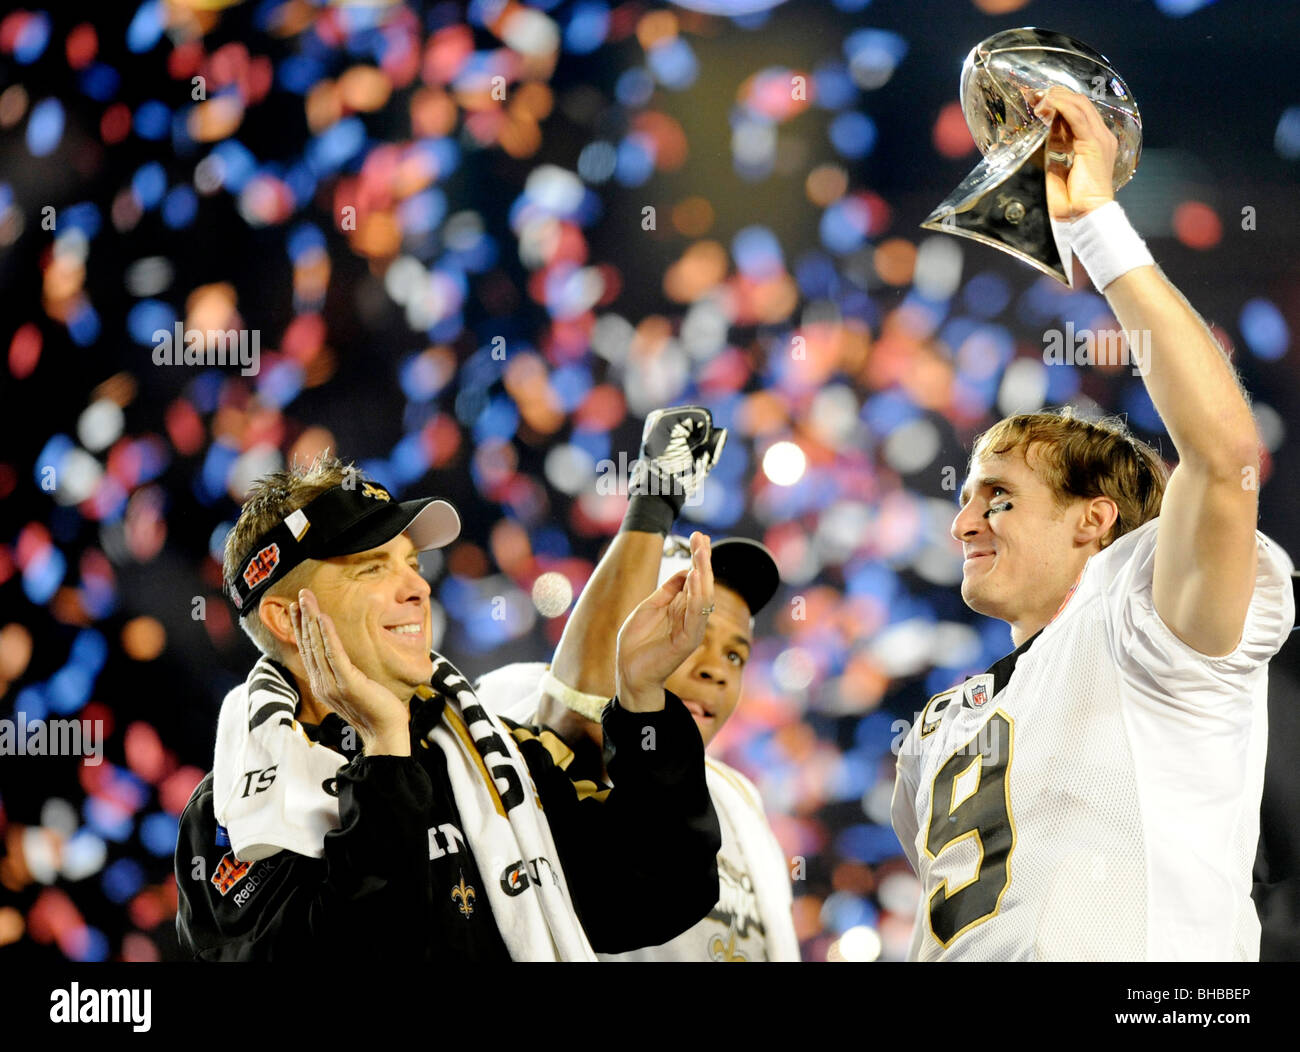 Drew Brees #9 of the New Orleans Saints holds up the Vince Lombardi